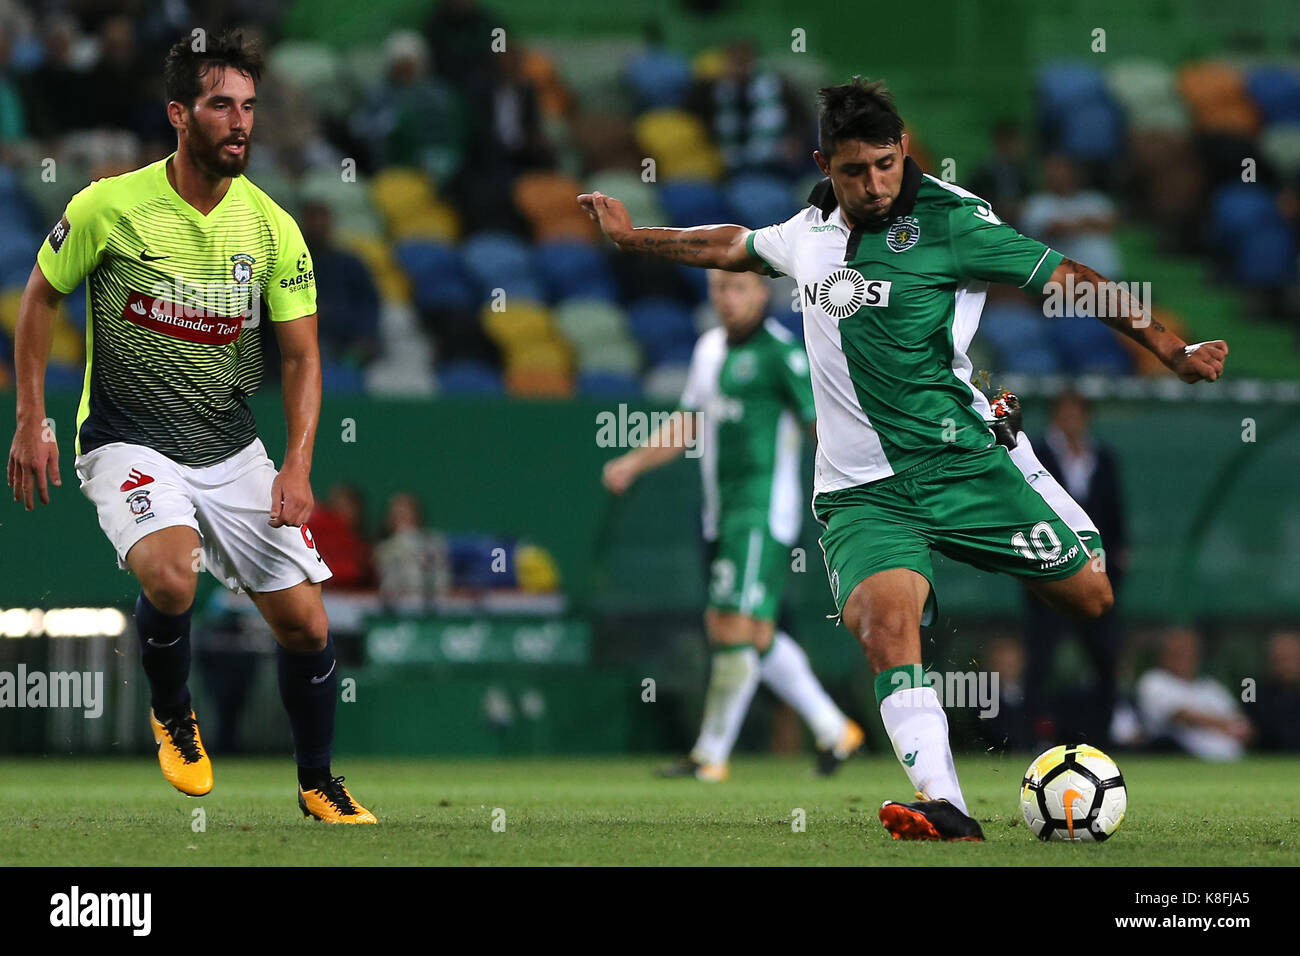 Lisbon, Portugal. 19th Sep, 2017. Sporting's forward Bryan Ruiz from Costa Rica (R) and Maritimo's midfielder Joao Gamboa from Portugal (L) during the Portuguese Cup 2017/18 match between Sporting CP v CS Maritimo, at Alvalade Stadium in Lisbon on September 19, 2017. Credit: Bruno Barros/Alamy Live News Stock Photo